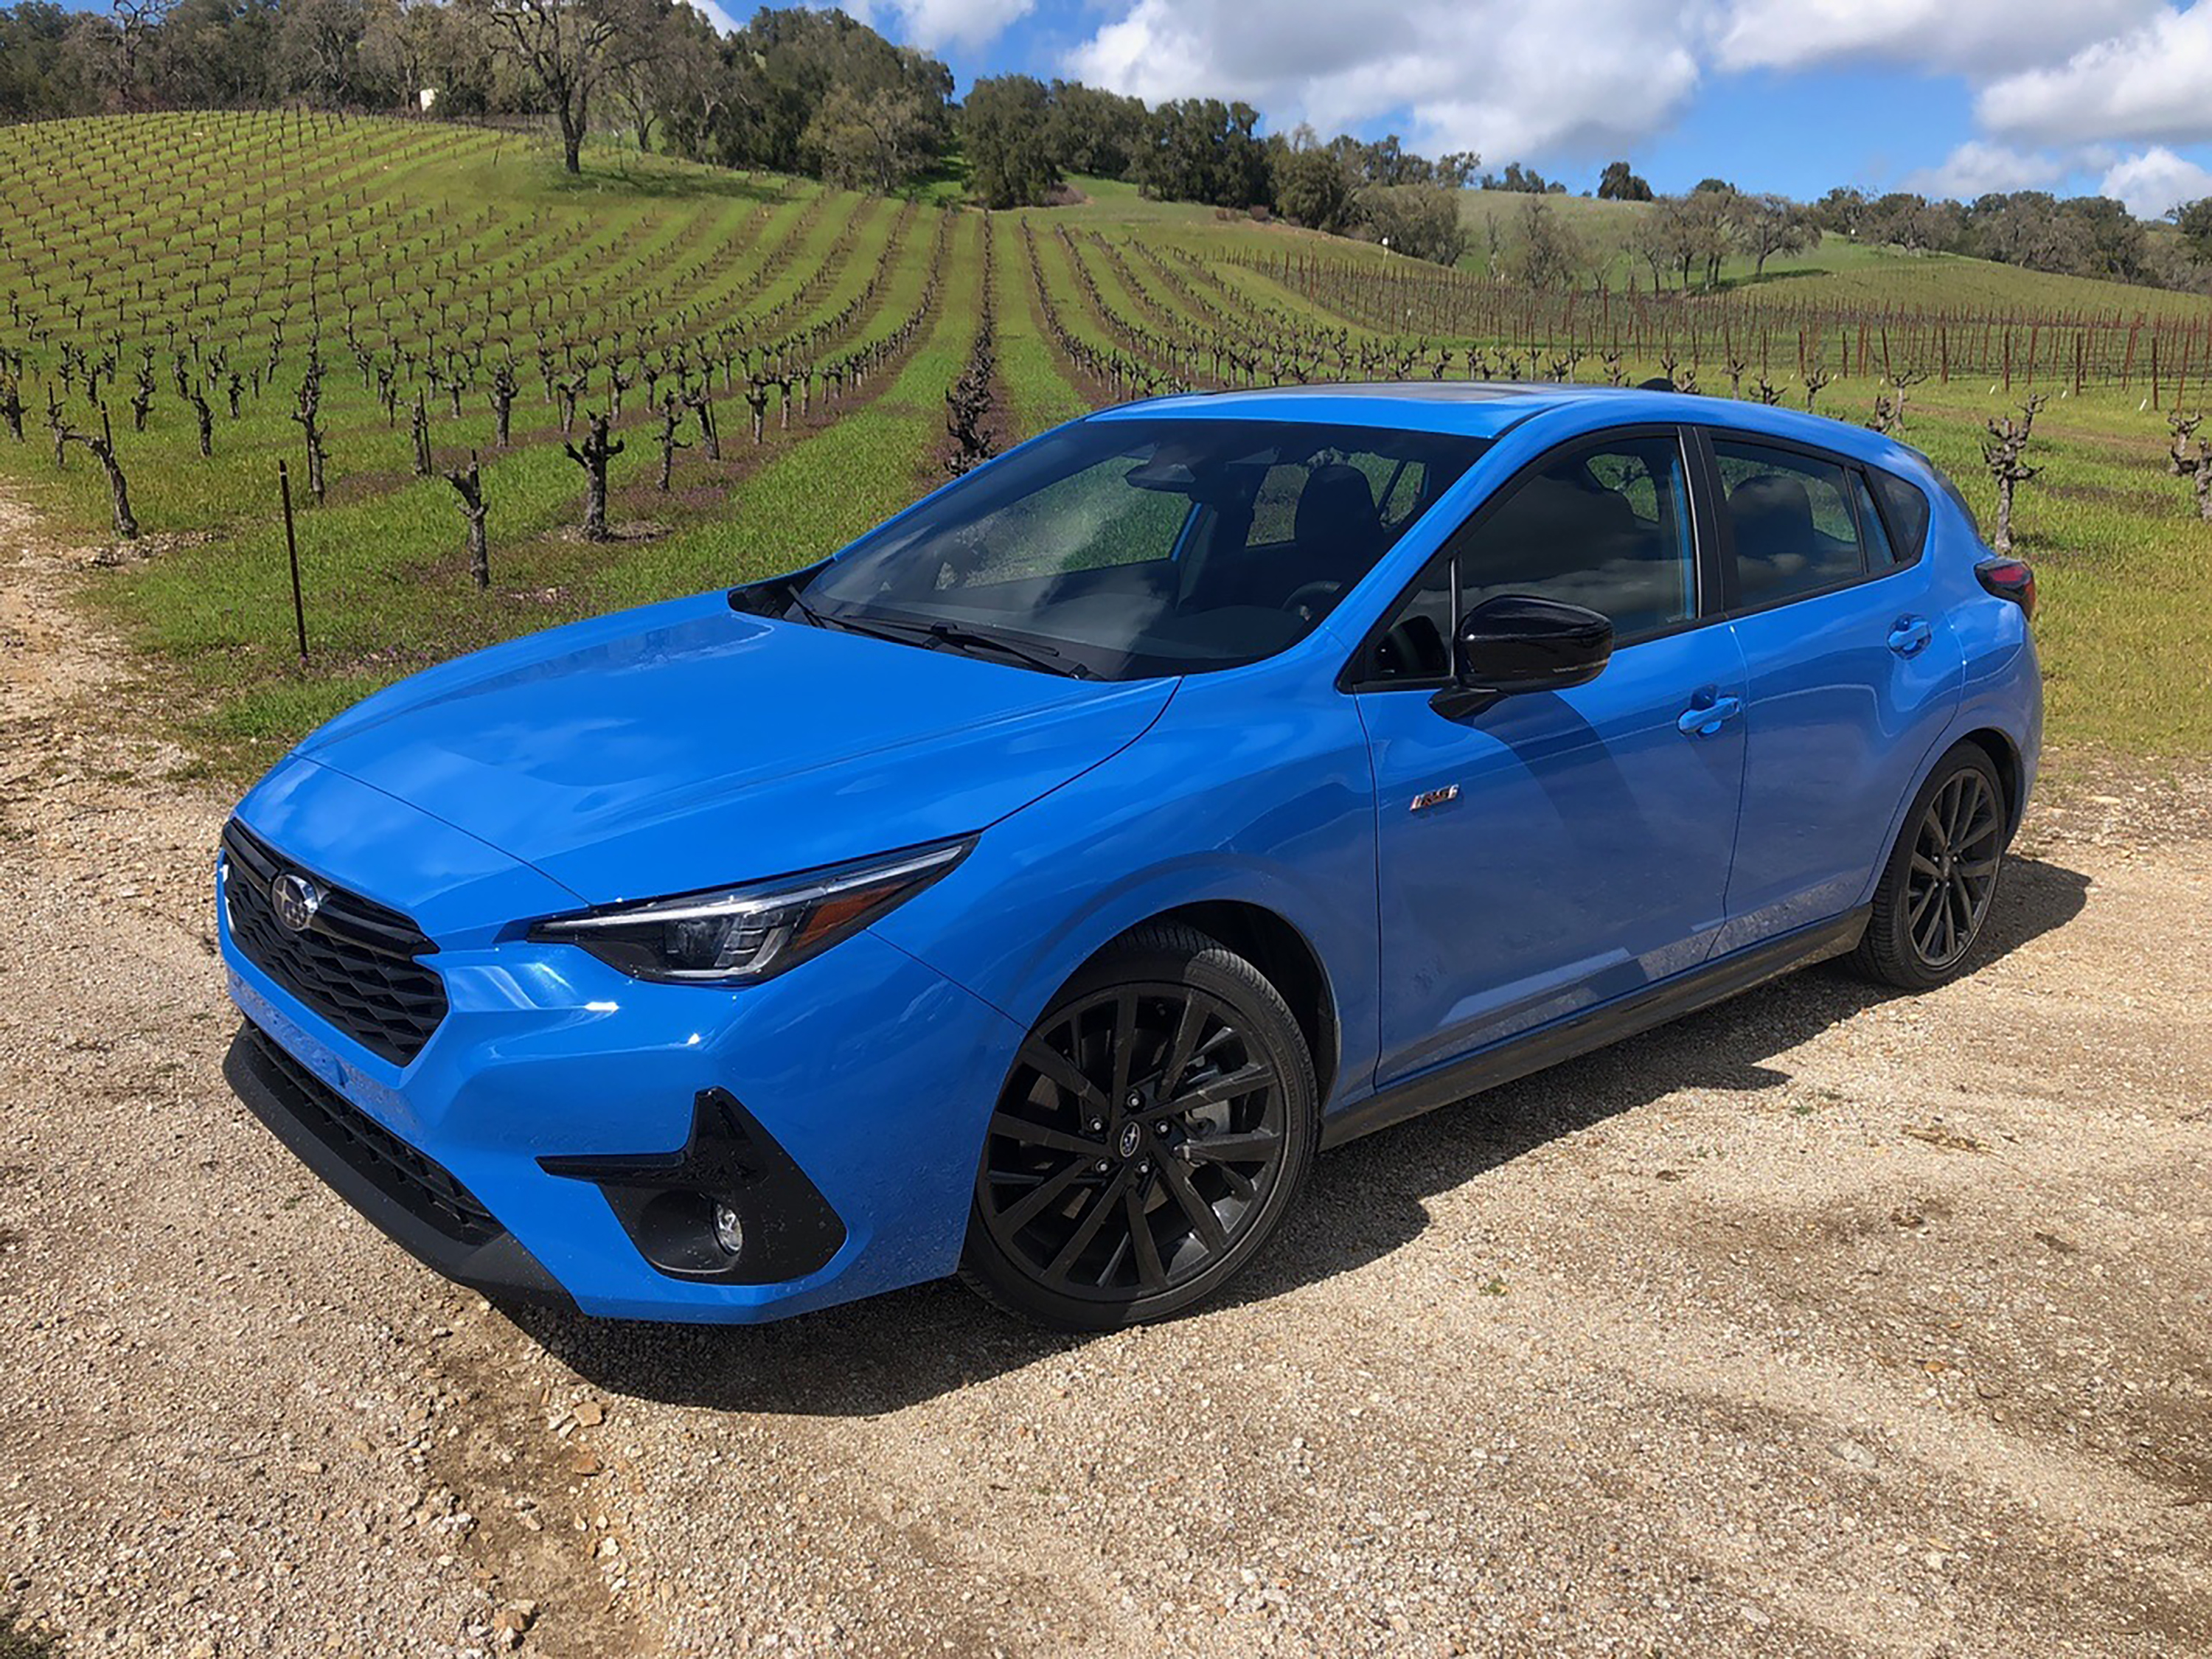 Auto review: All-new 2024 Subaru Impreza is the sports car for everyday life